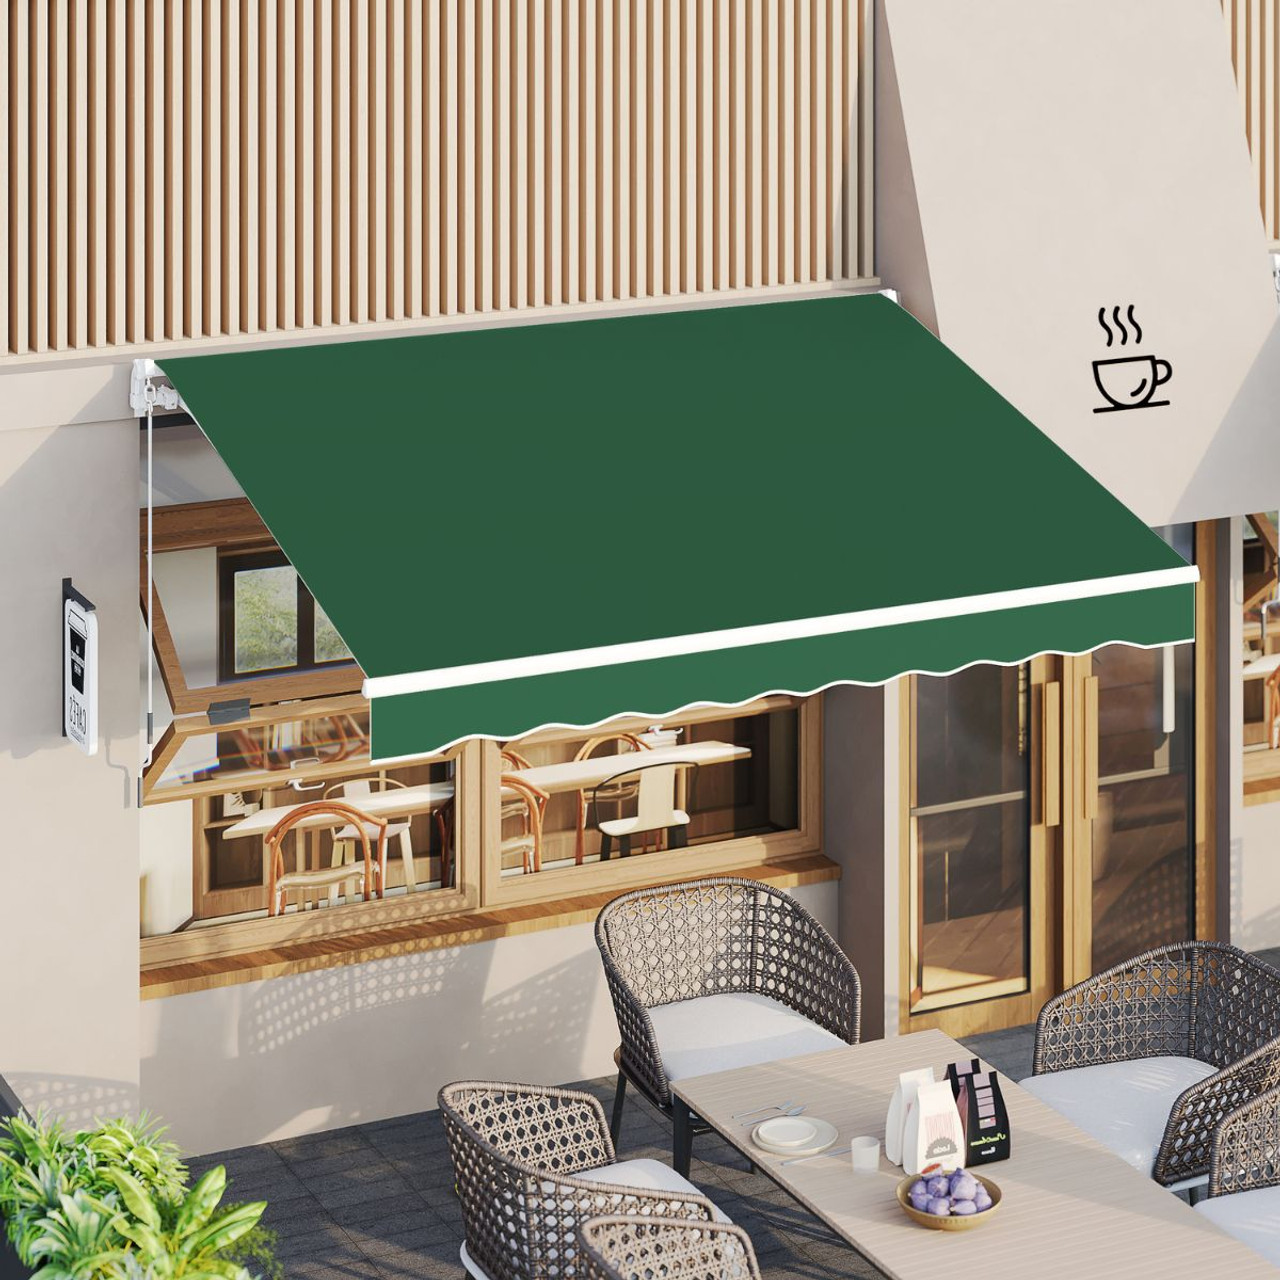 Manual Retractable Sun Shade Awning with Manual Crank product image